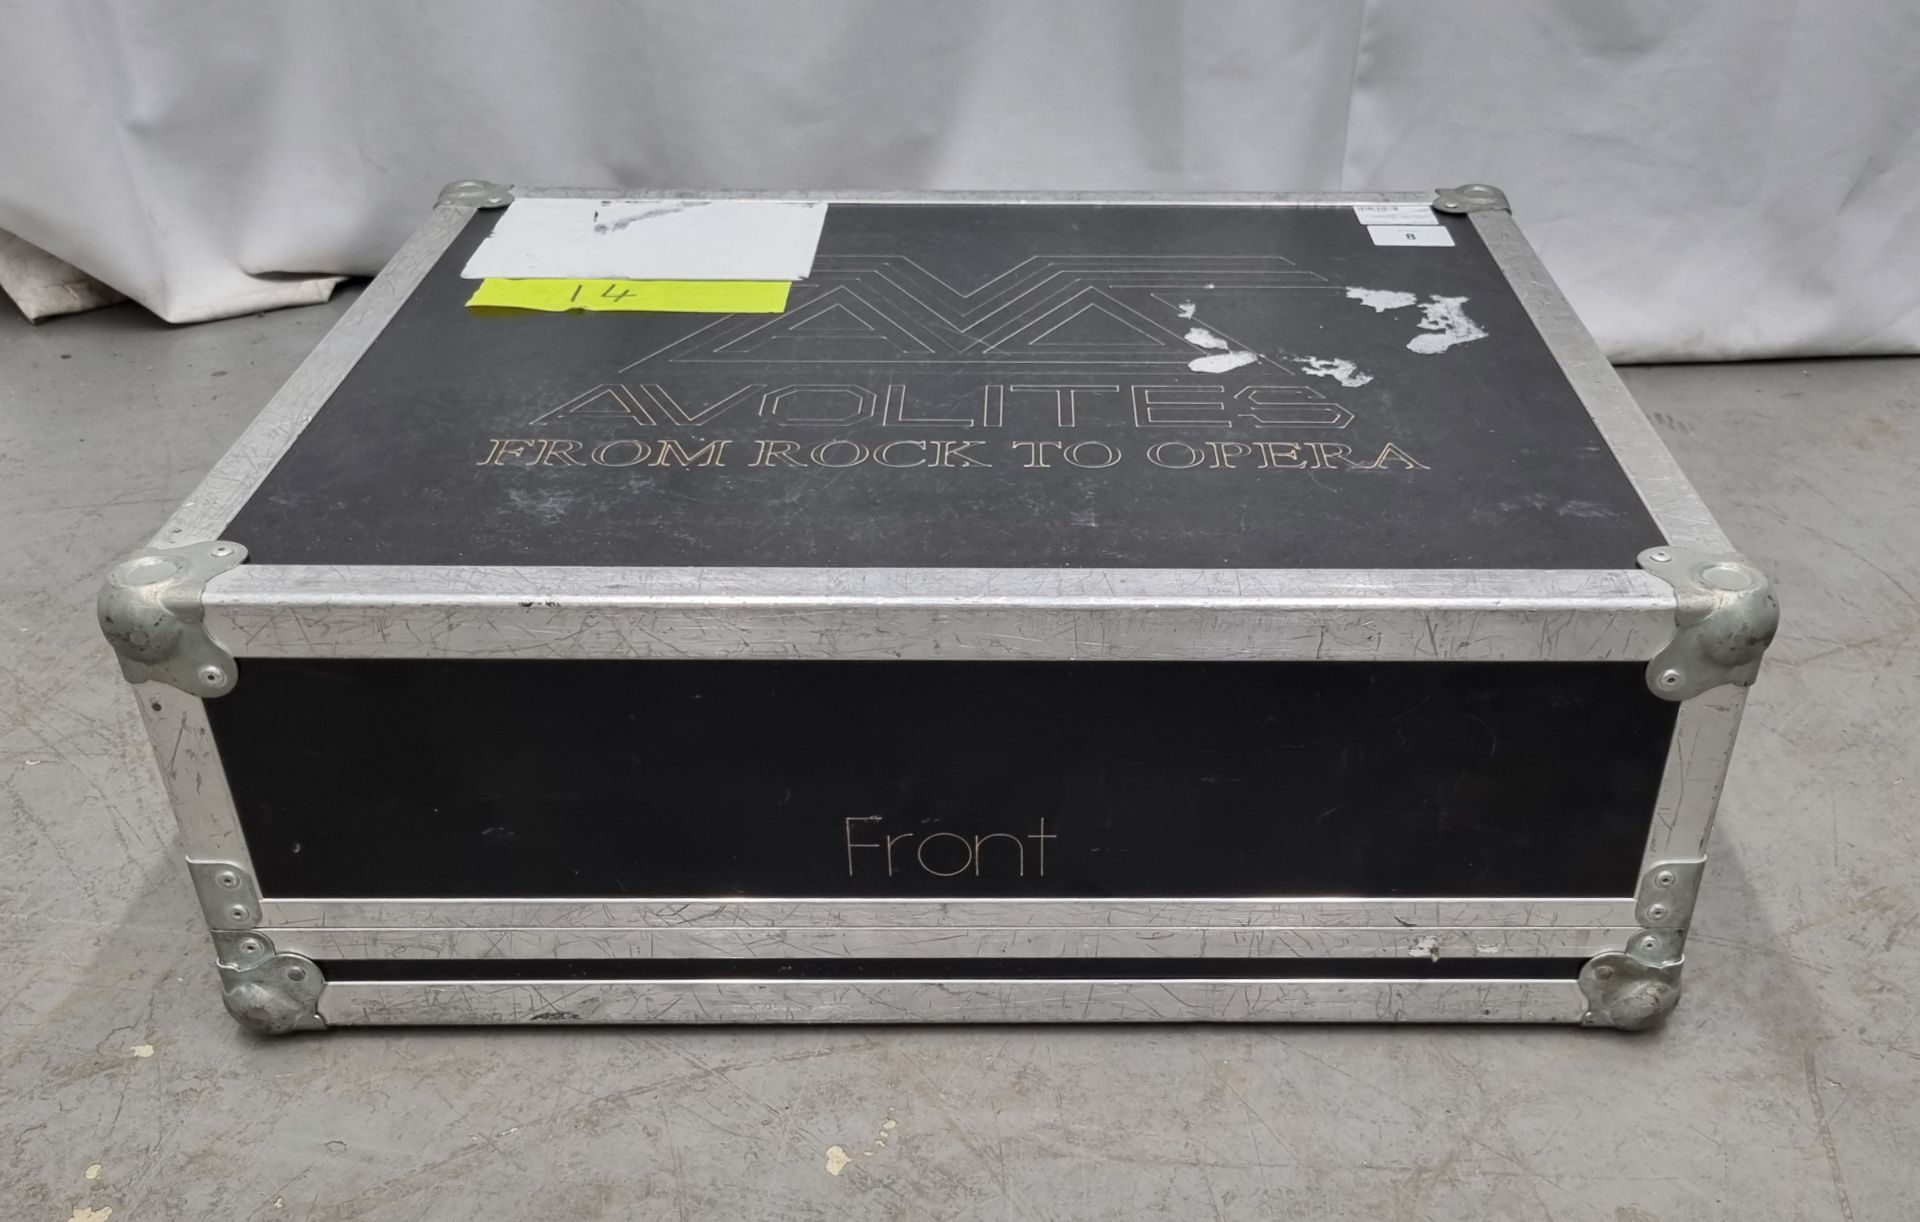 Avolites Pearl Tiger lighting console with flight case - Image 8 of 9